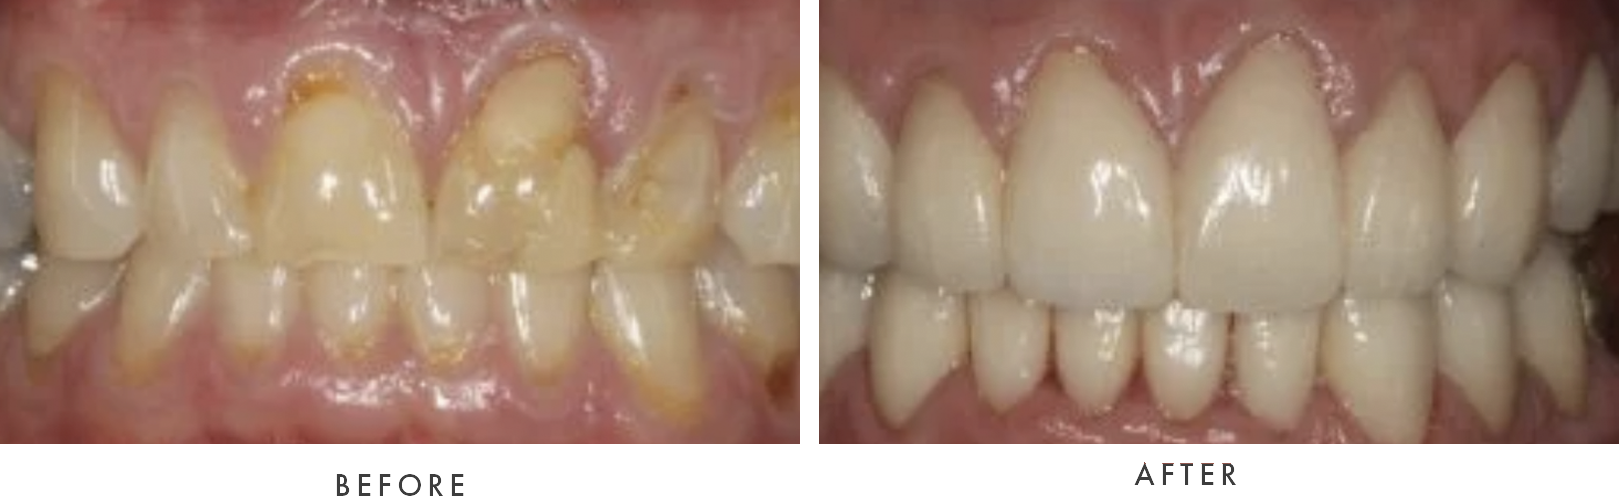 dental crown combined case 5 drscruggs